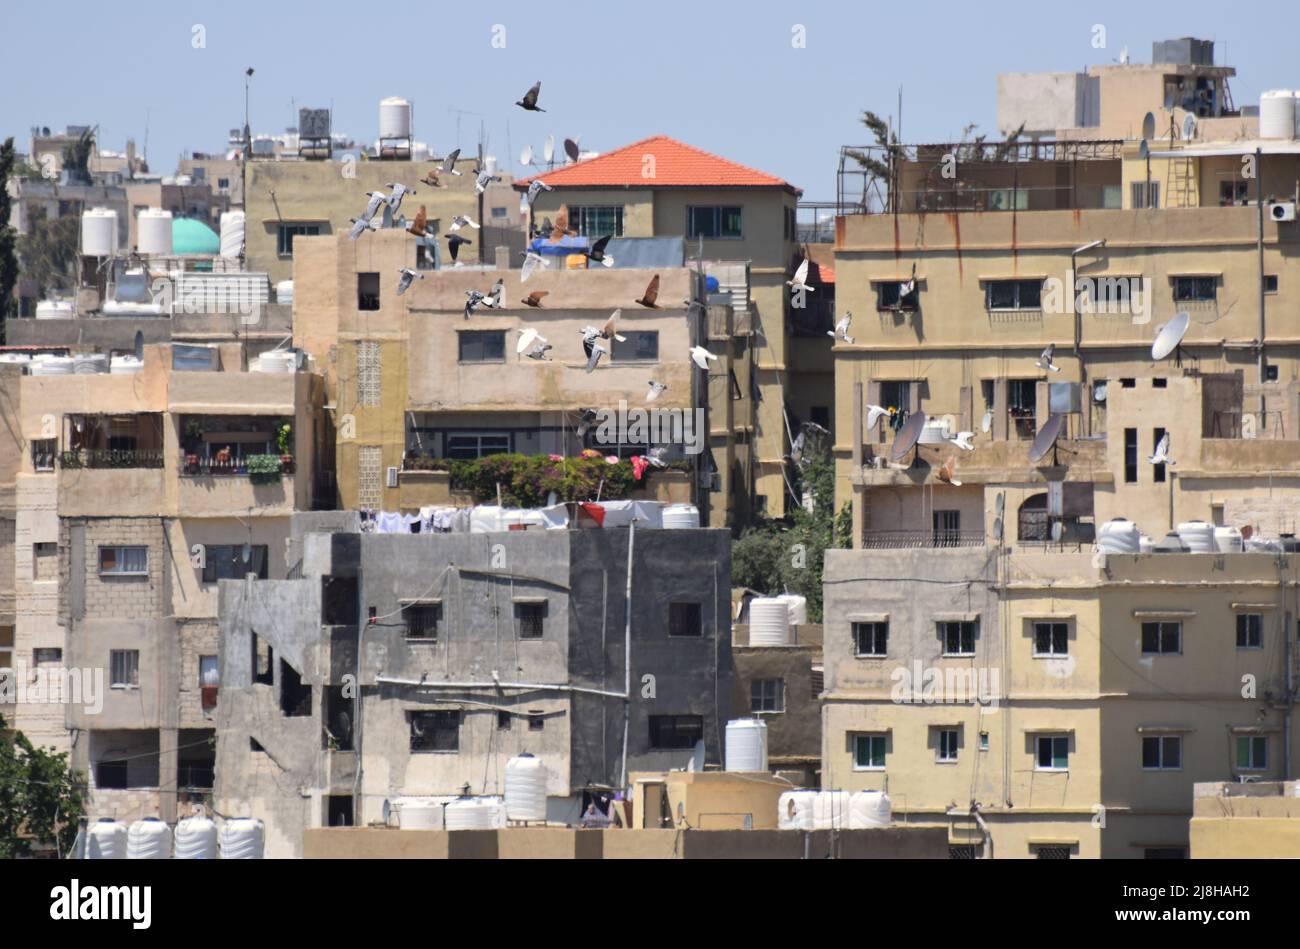 A flock of pigeons flying over the buildings of the city of Amman in Jordan Stock Photo